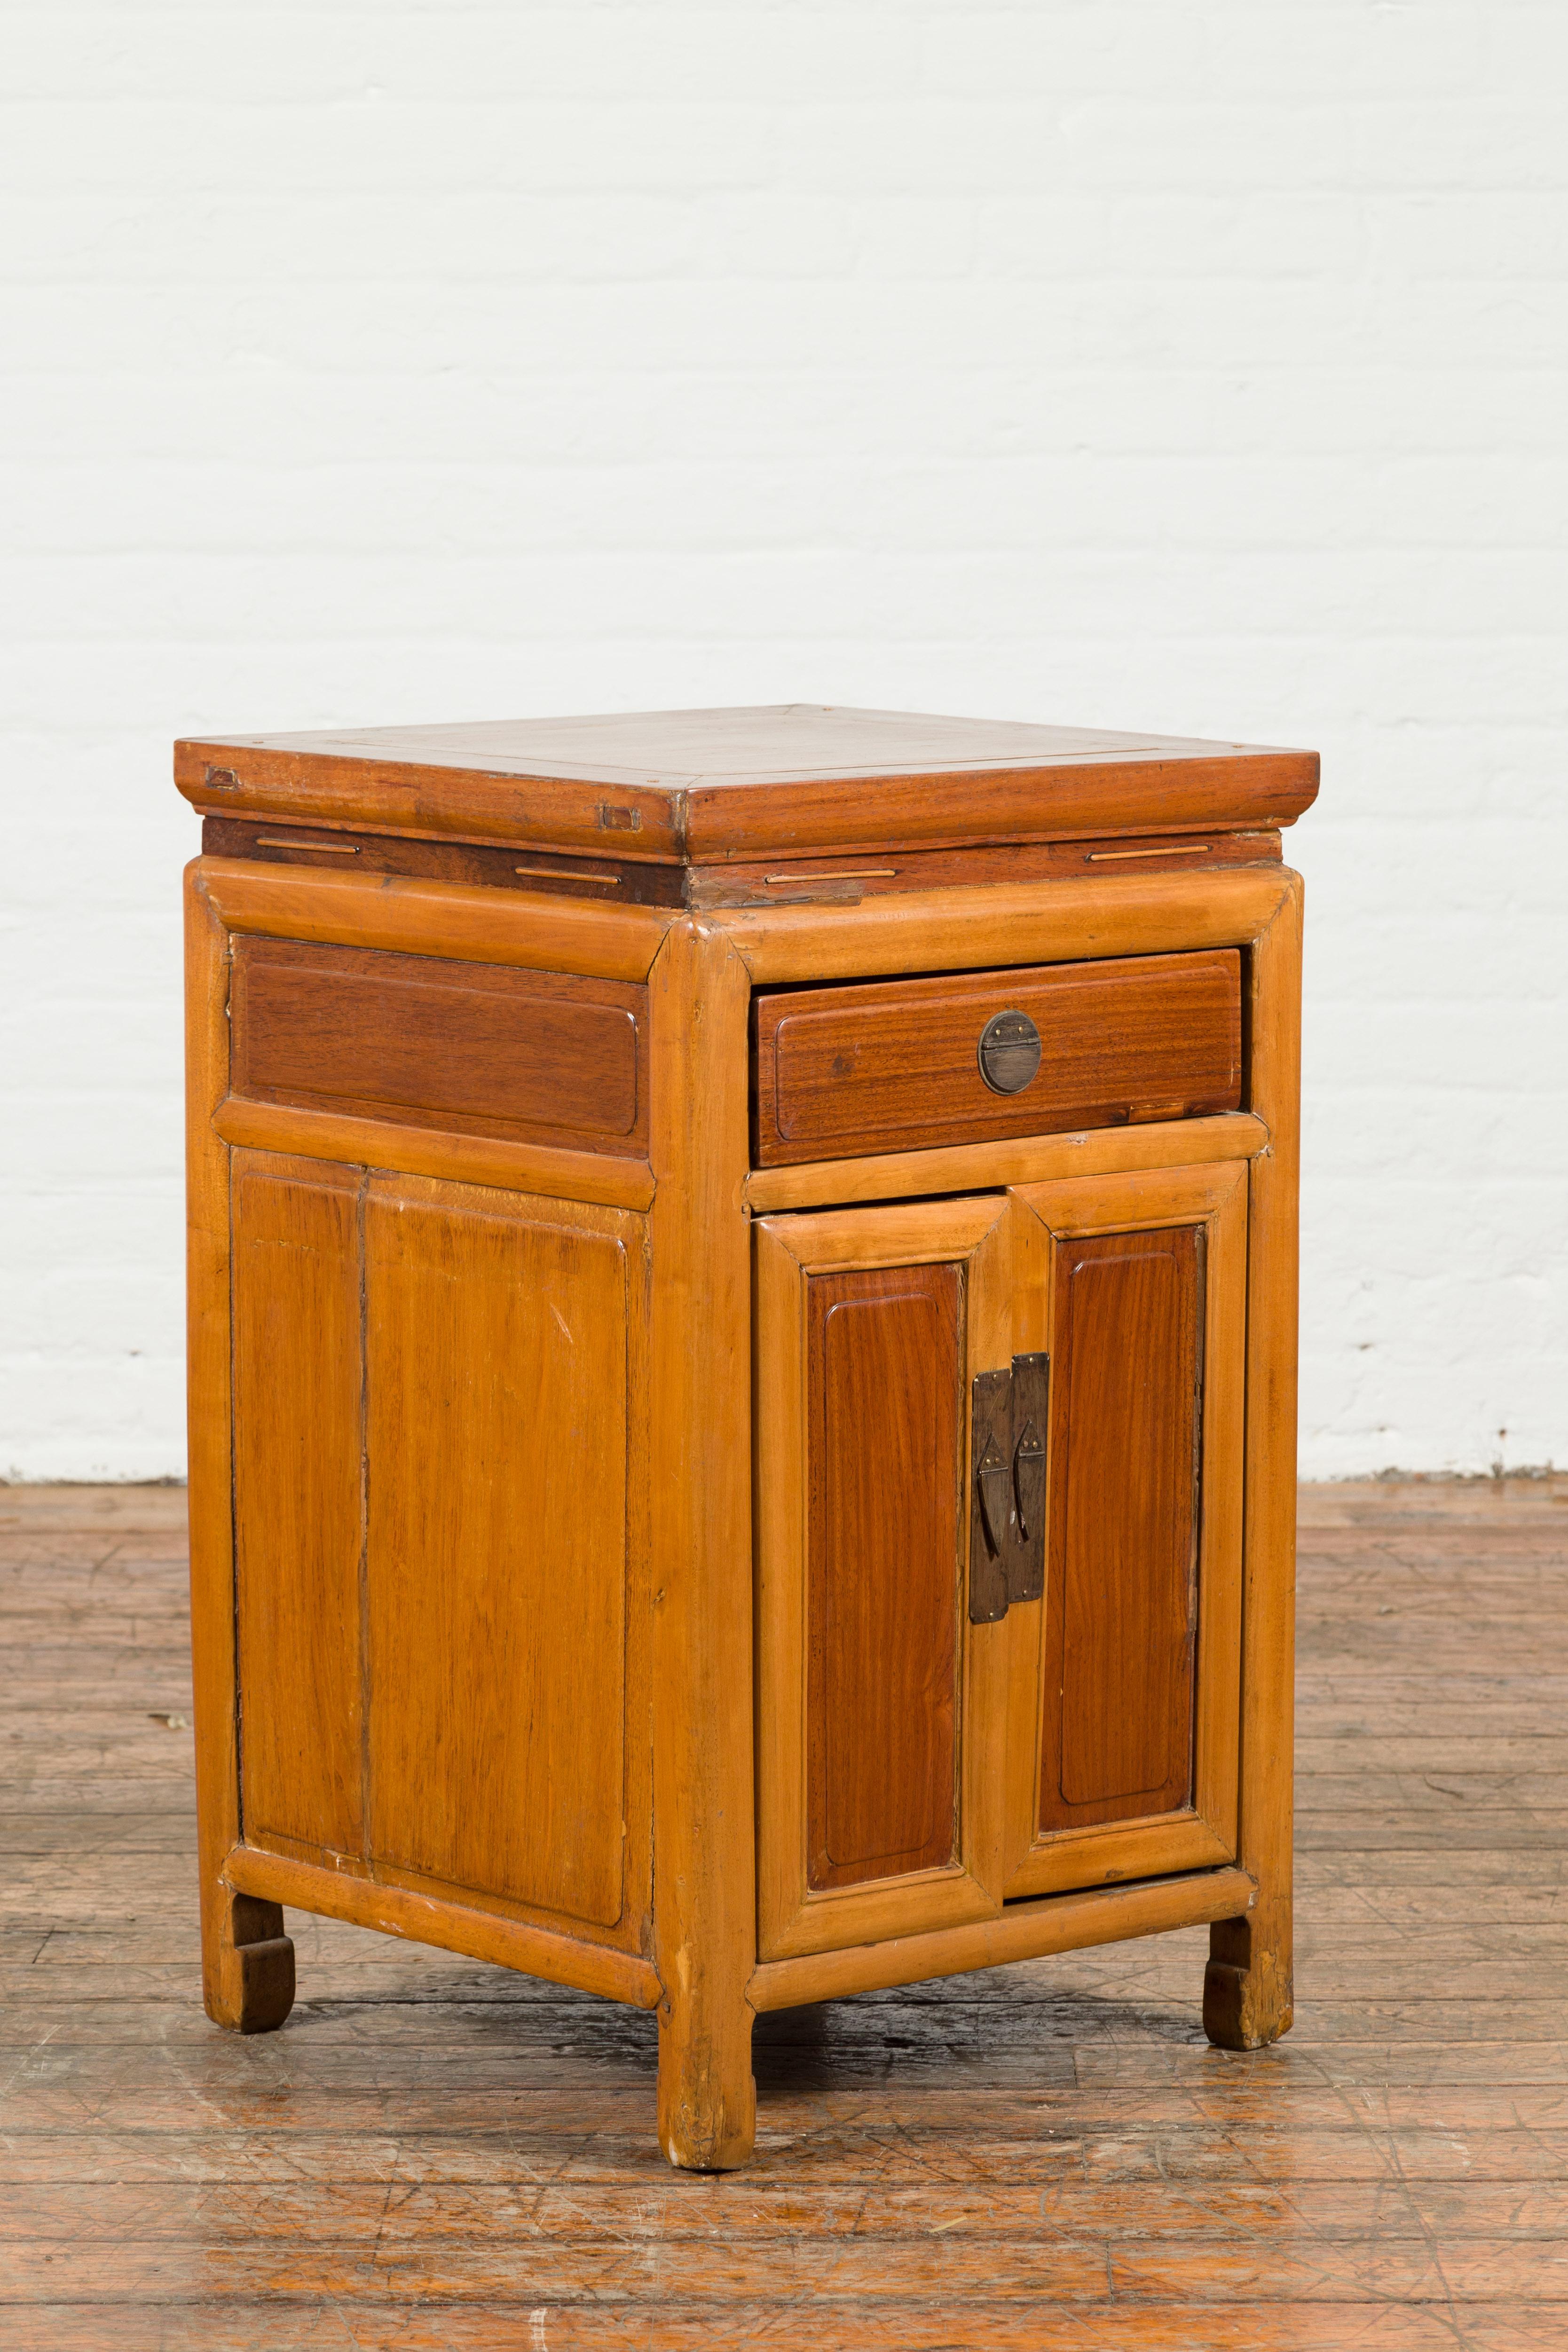 A Chinese vintage two-toned side table from the mid 20th century, with natural patina, single drawer and double doors. Created in China during the midcentury period, this vintage side table features a square waisted top with central board, sitting